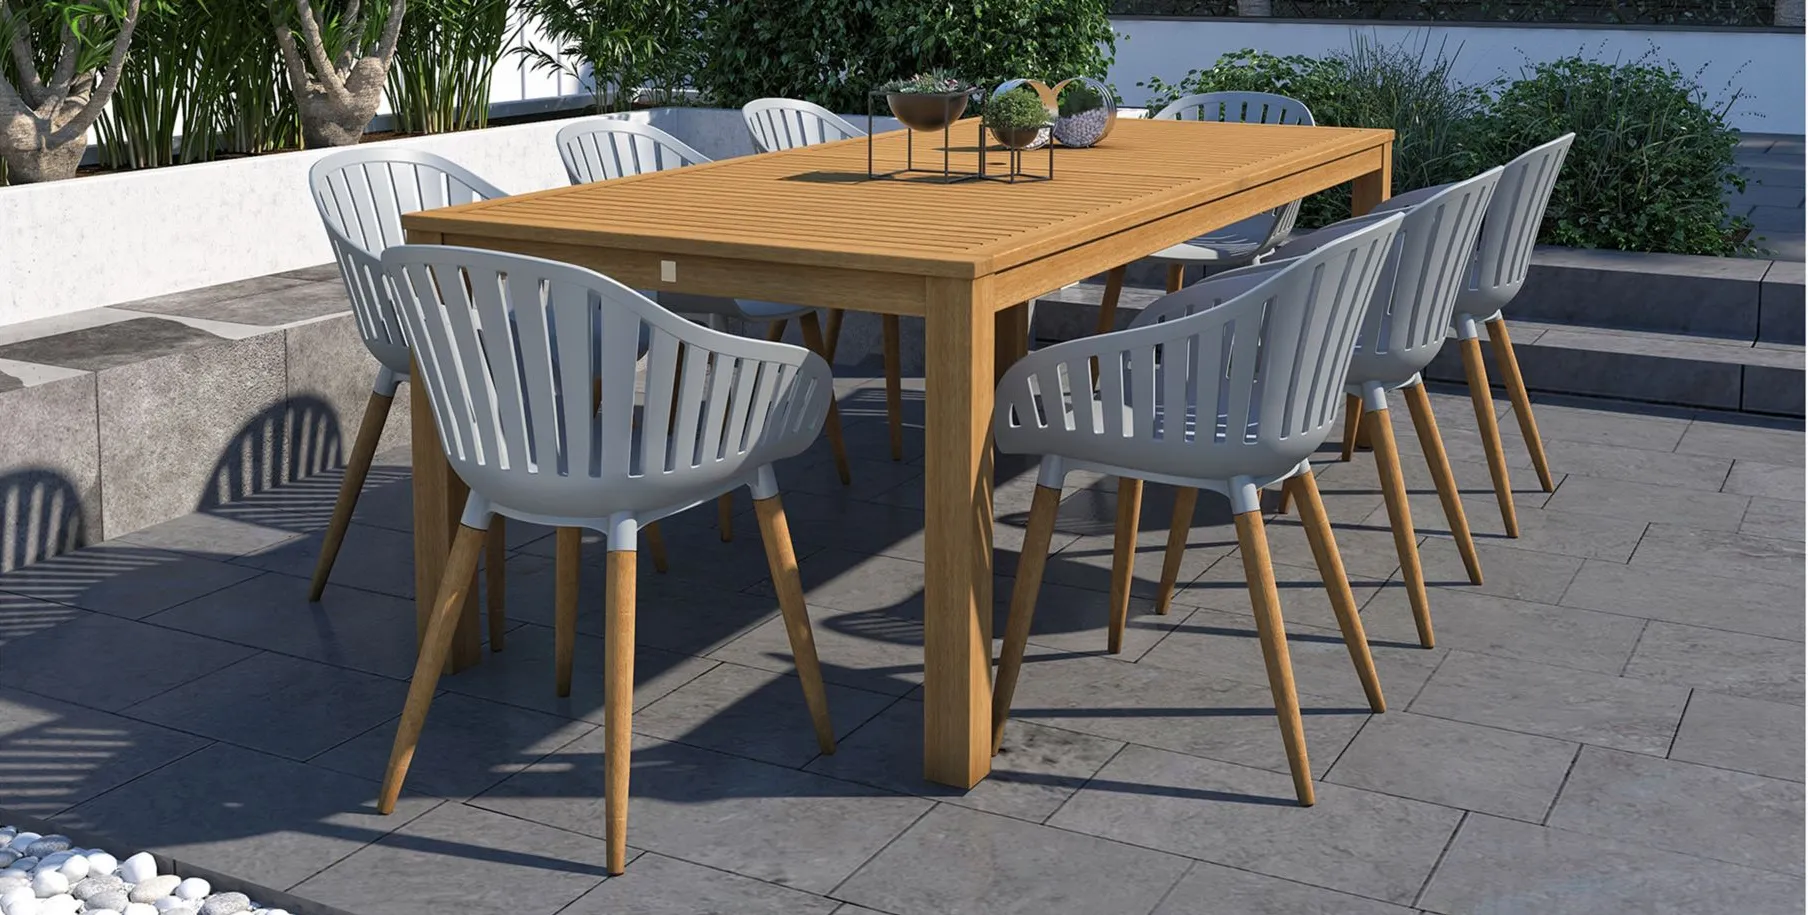 Amazonia Outdoor 9-pc. Rectangular Patio Dining Table Set in Brown by International Home Miami